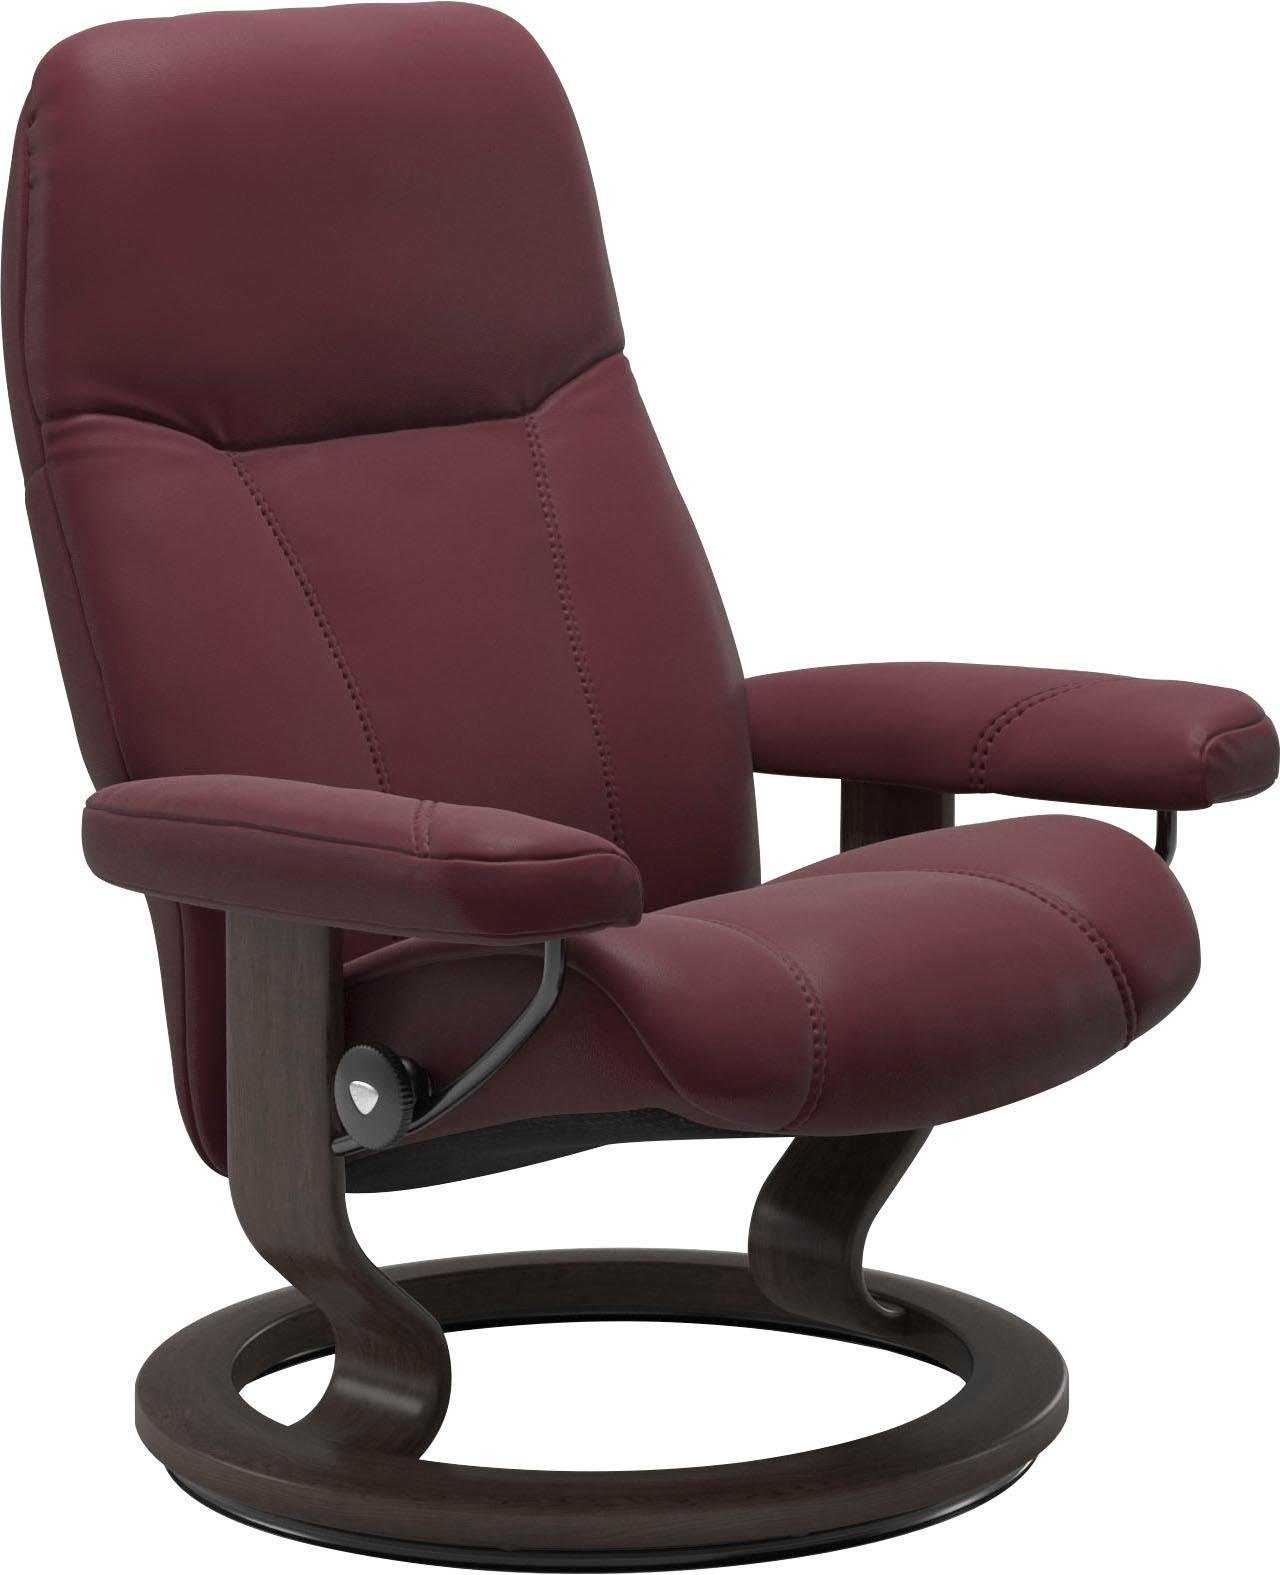 Stressless® Relaxsessel mit Wenge Gestell Base, Größe L, Classic Consul